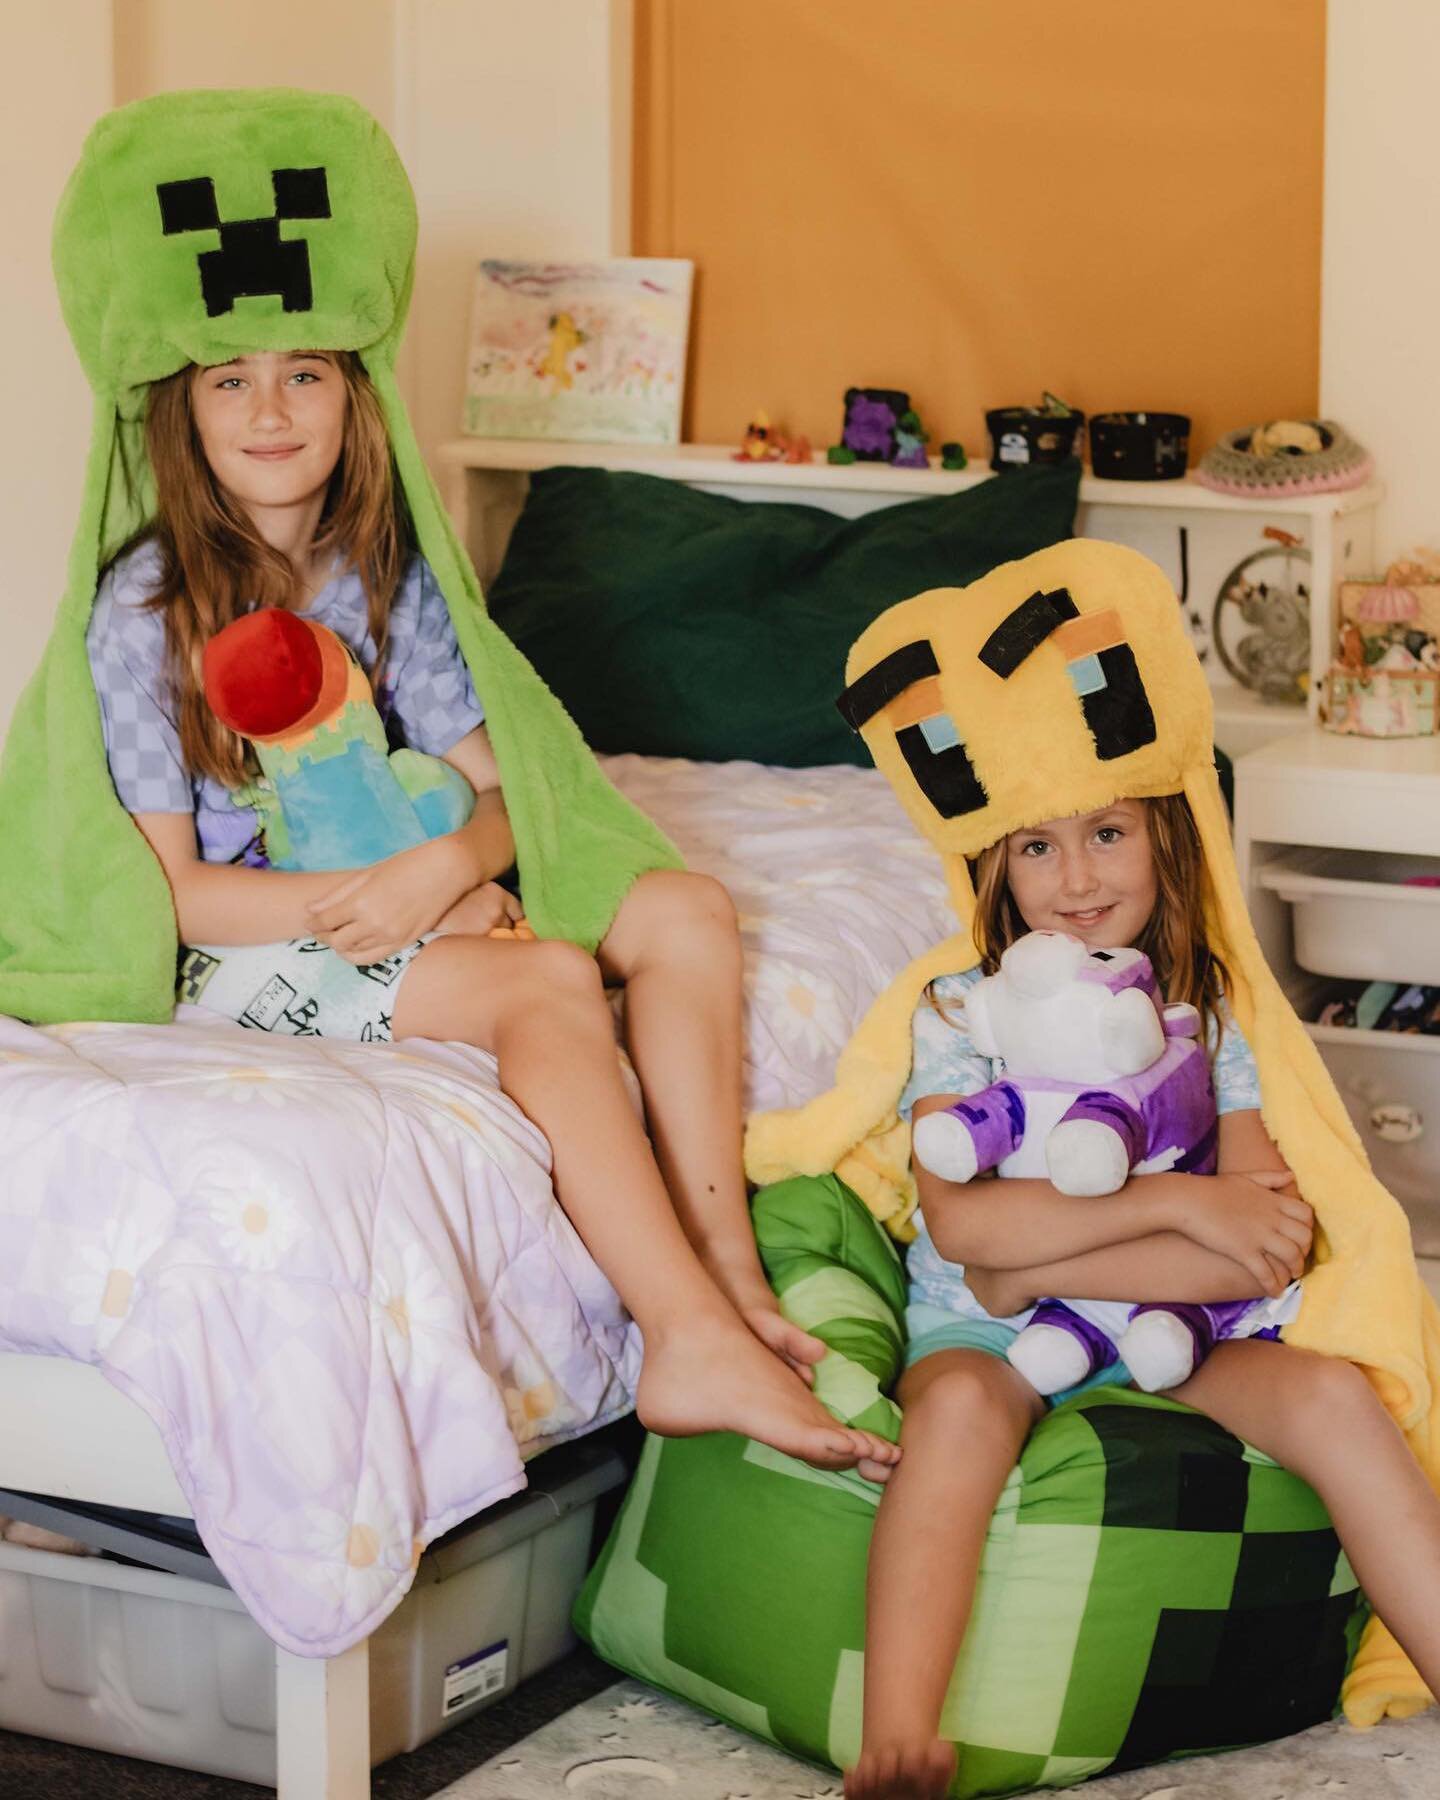 Dreaming in blocks and waking up to a world of pixels! 🌙✨ Embrace the cozy vibes of our Minecraft bedding, where every night feels like an adventure and every dream is a new block to build. 🛌🎮

@happily.everson.after #minecraft #minecraftlegends #